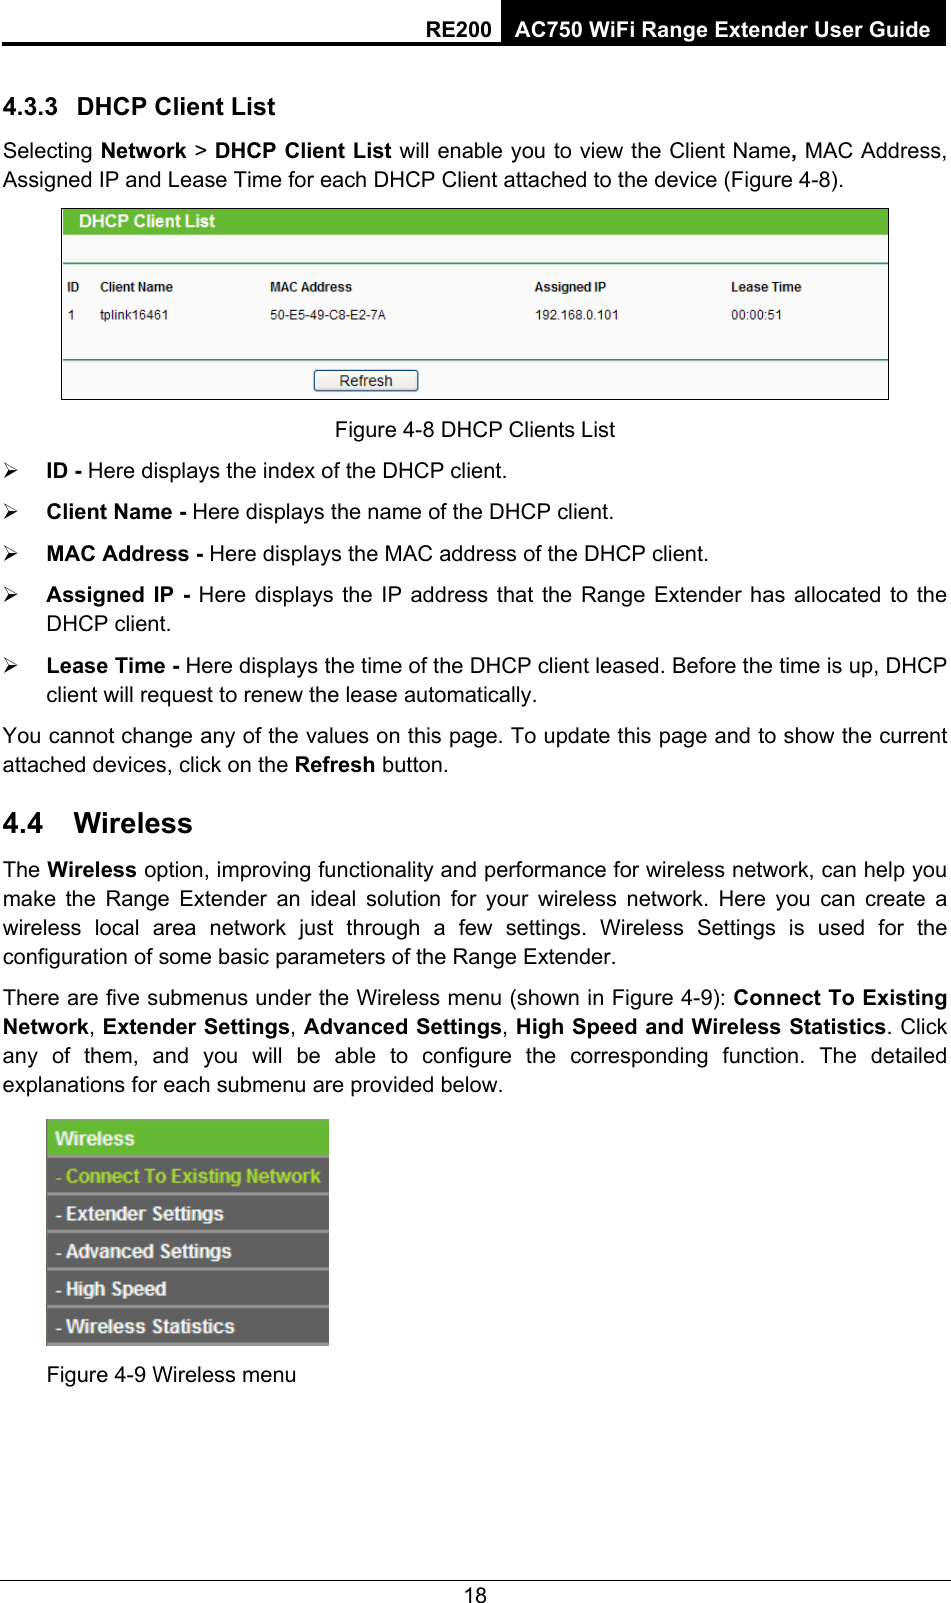 RE200 AC750 WiFi Range Extender User Guide 4.3.3  DHCP Client List Selecting Network &gt; DHCP Client List will enable you to view the Client Name, MAC Address, Assigned IP and Lease Time for each DHCP Client attached to the device (Figure 4-8).  Figure 4-8 DHCP Clients List ¾ ID - Here displays the index of the DHCP client. ¾ Client Name - Here displays the name of the DHCP client. ¾ MAC Address - Here displays the MAC address of the DHCP client. ¾ Assigned IP - Here displays the IP address that the Range Extender has allocated to the DHCP client. ¾ Lease Time - Here displays the time of the DHCP client leased. Before the time is up, DHCP client will request to renew the lease automatically. You cannot change any of the values on this page. To update this page and to show the current attached devices, click on the Refresh button. 4.4  Wireless The Wireless option, improving functionality and performance for wireless network, can help you make the Range Extender an ideal solution for your wireless network. Here you can create a wireless local area network just through a few settings. Wireless Settings is used for the configuration of some basic parameters of the Range Extender. There are five submenus under the Wireless menu (shown in Figure 4-9): Connect To Existing Network, Extender Settings, Advanced Settings, High Speed and Wireless Statistics. Click any of them, and you will be able to configure the corresponding function. The detailed explanations for each submenu are provided below.  Figure 4-9 Wireless menu 18 